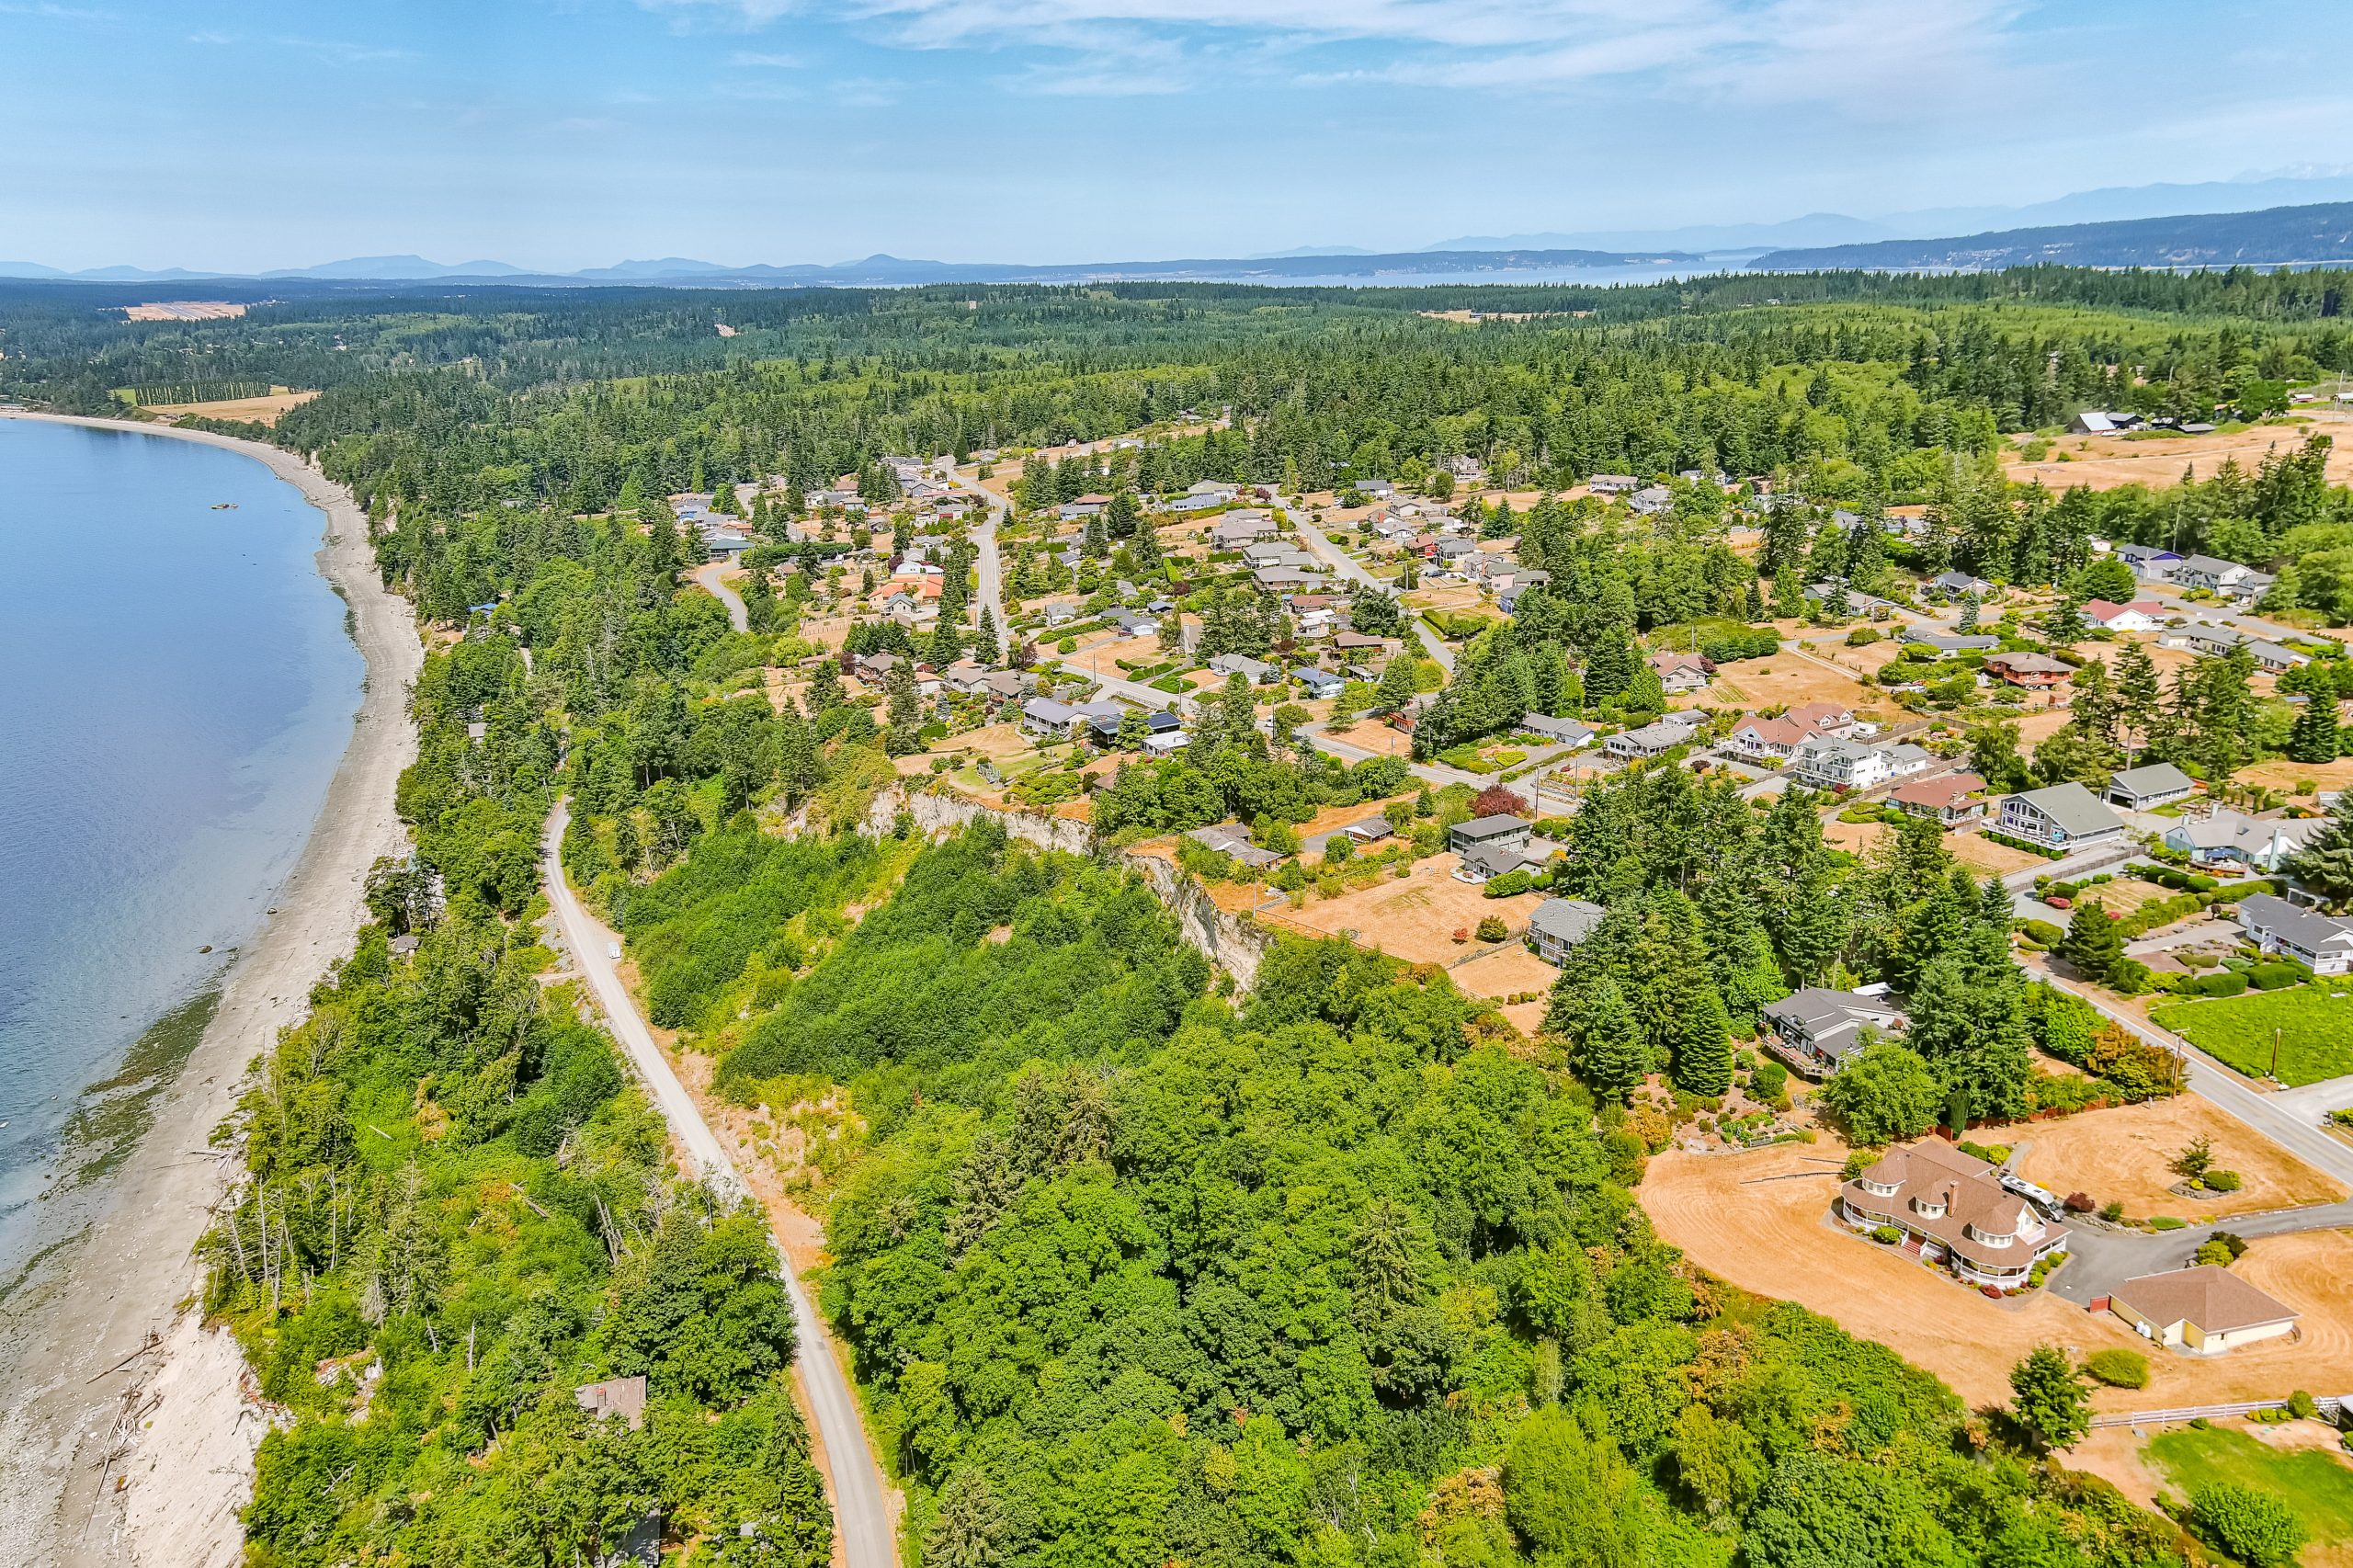 Ledgewood & Bon Air View, Waterfront, Beach front, Drive, Whidbey Island, Windermere Real Estate Whidbey Island